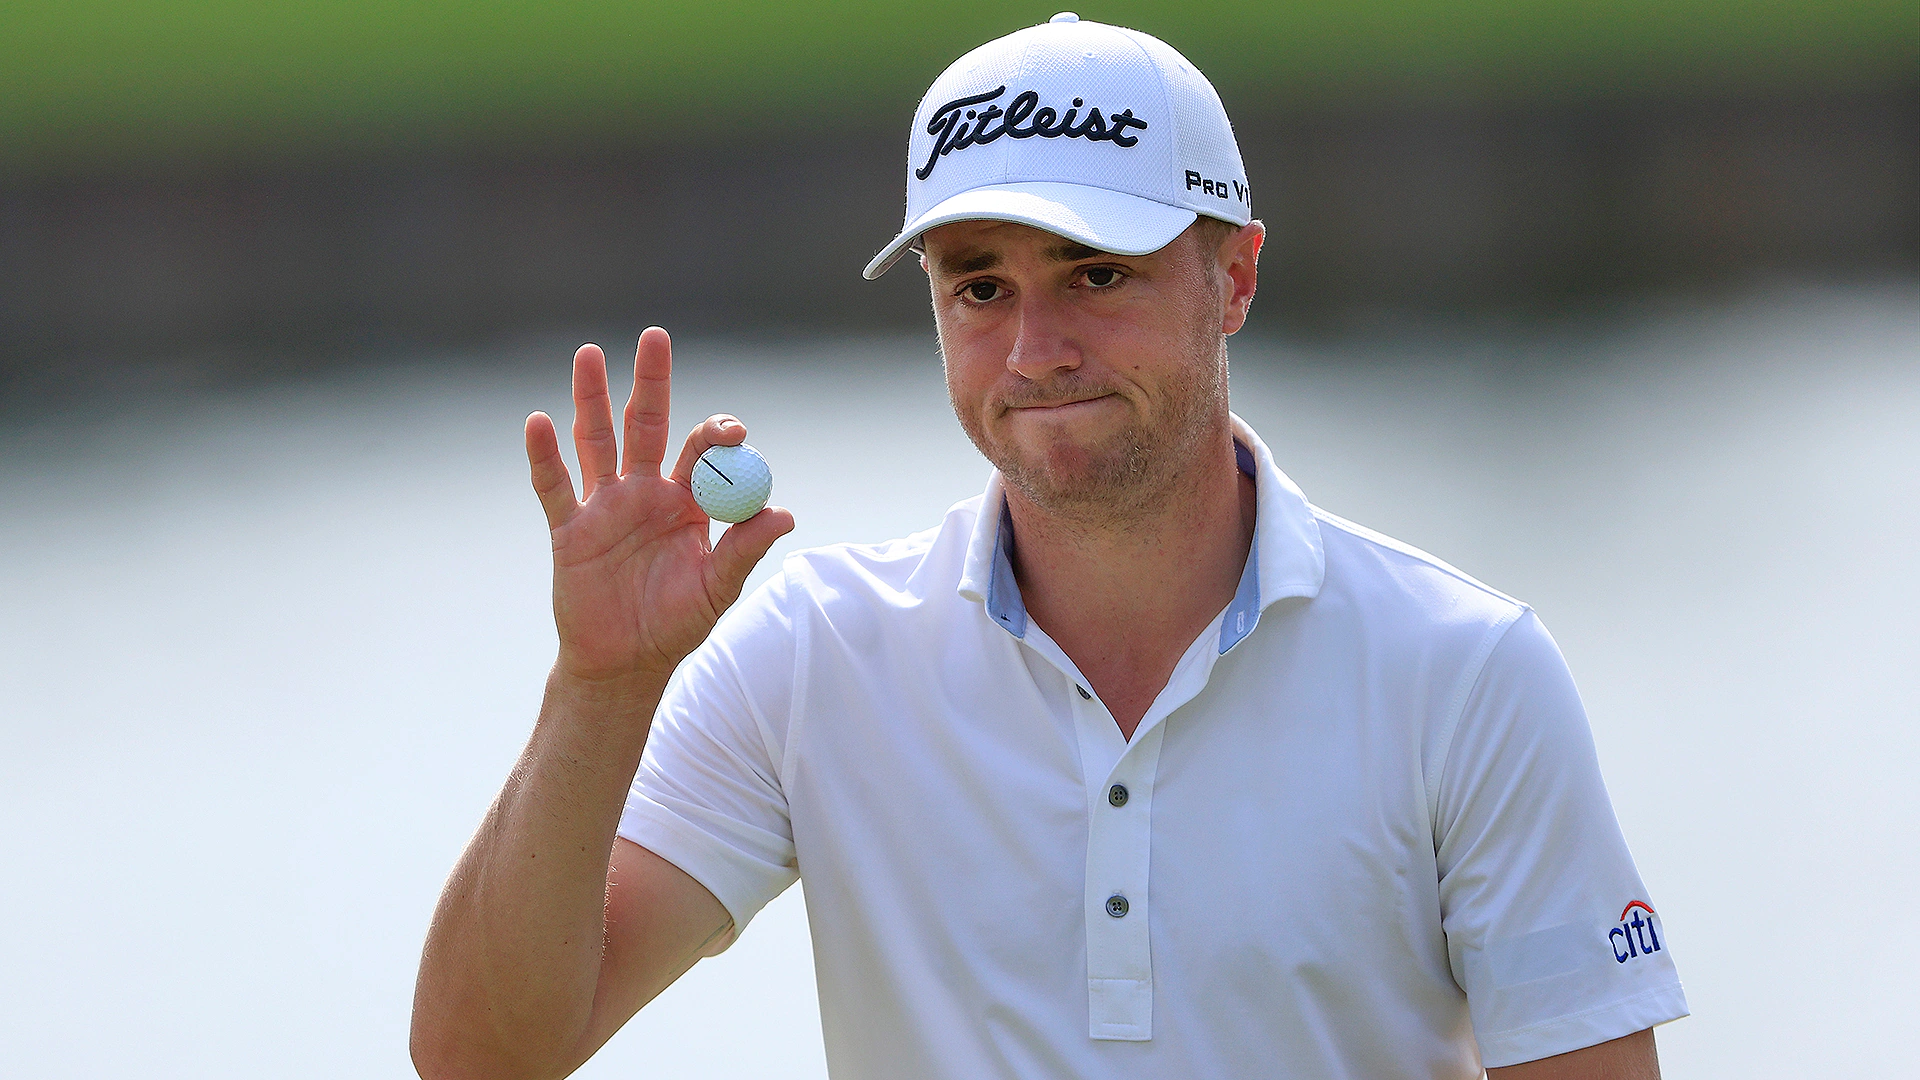 After series of lows, Justin Thomas enjoys his 64 in Round 3 of The Players